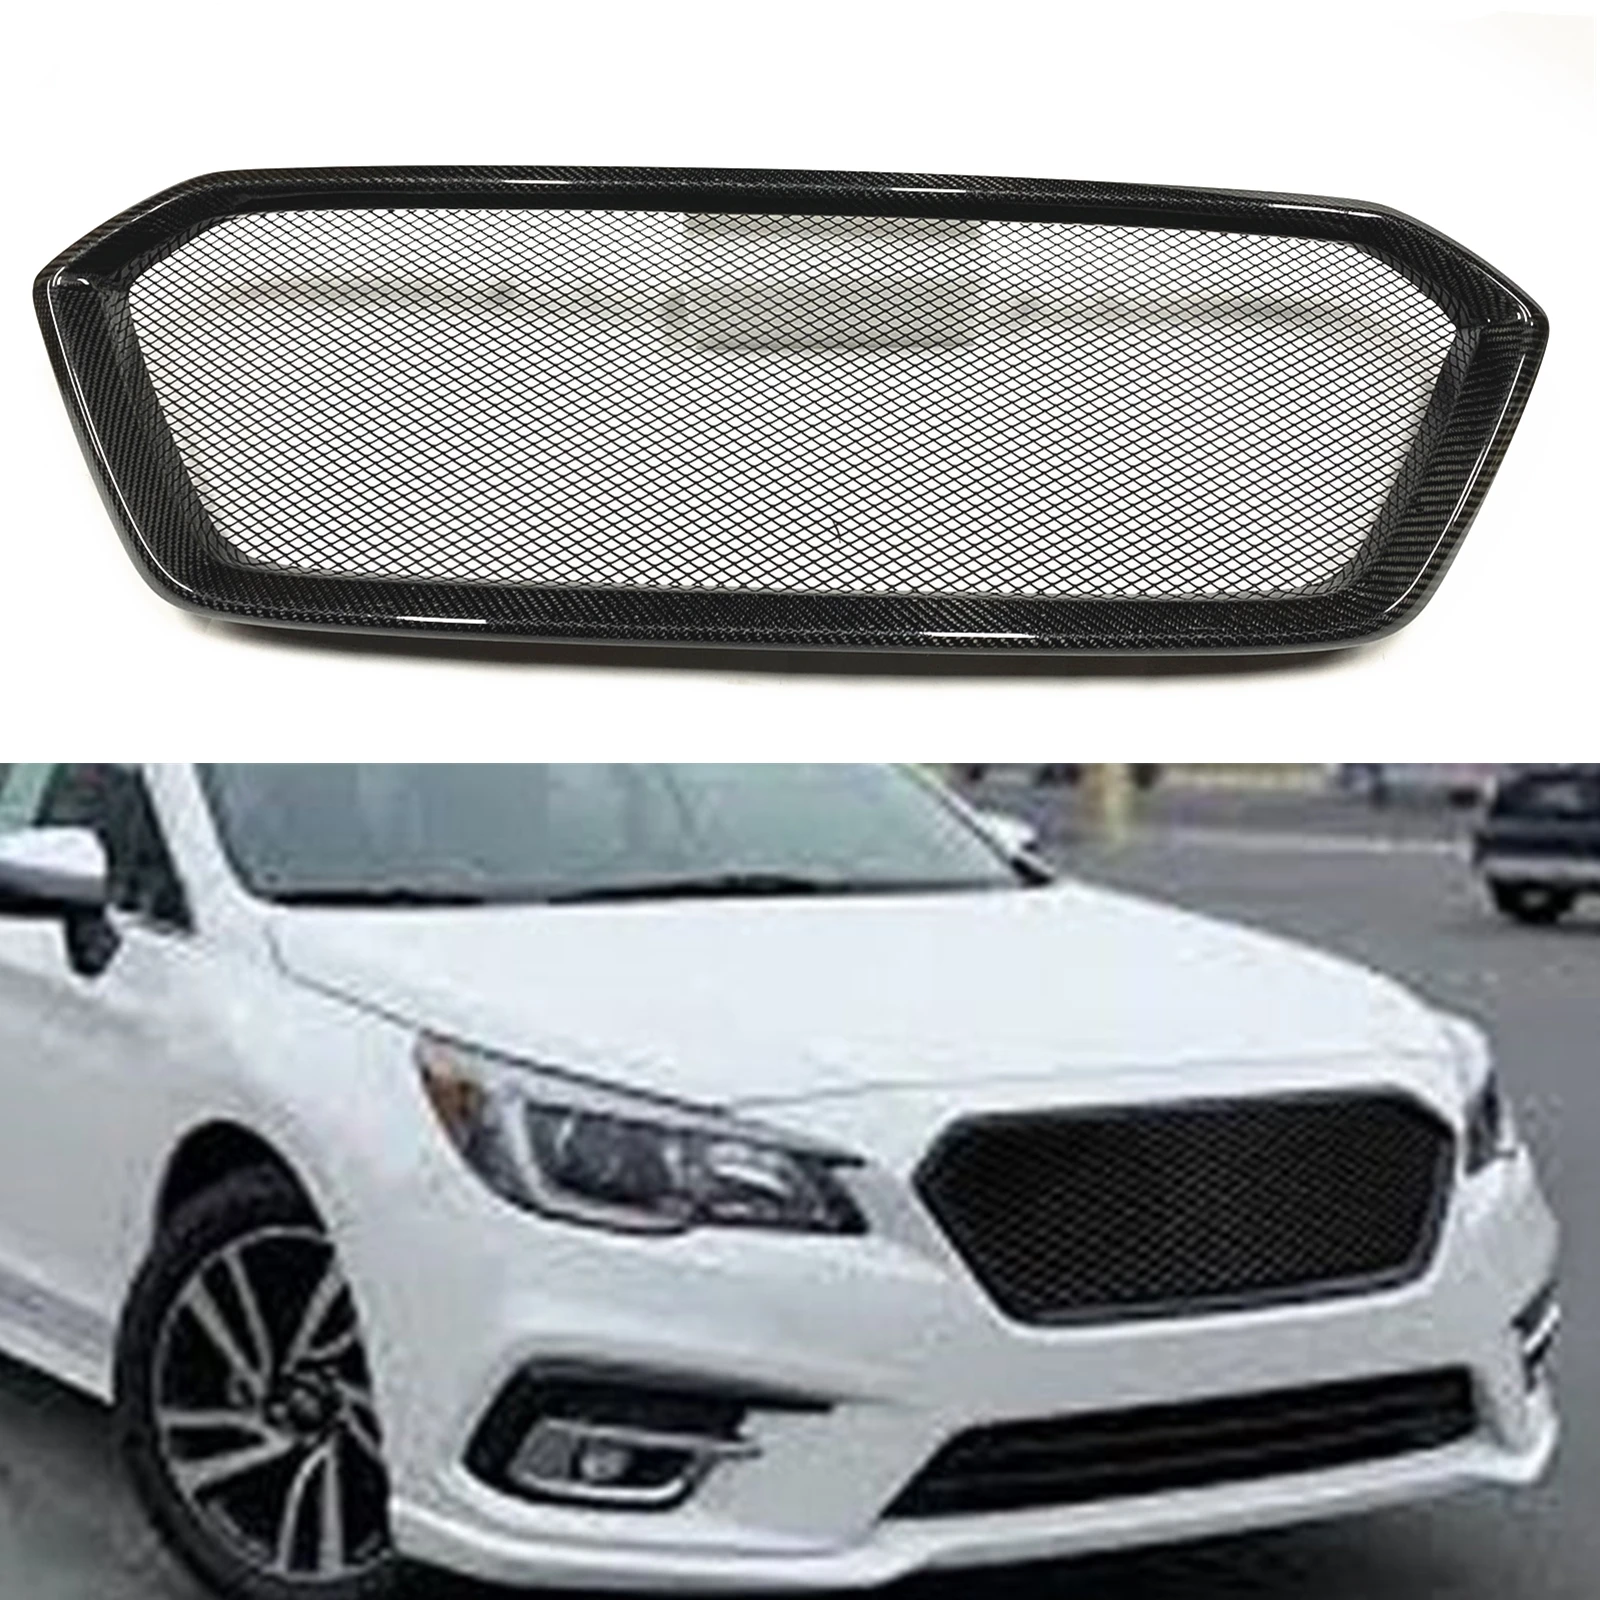 

Front Grille Upper Bumper Hood Mesh Grid Trim Racing Grill For Subaru Outback Legacy Sport Wagon 2018 2019